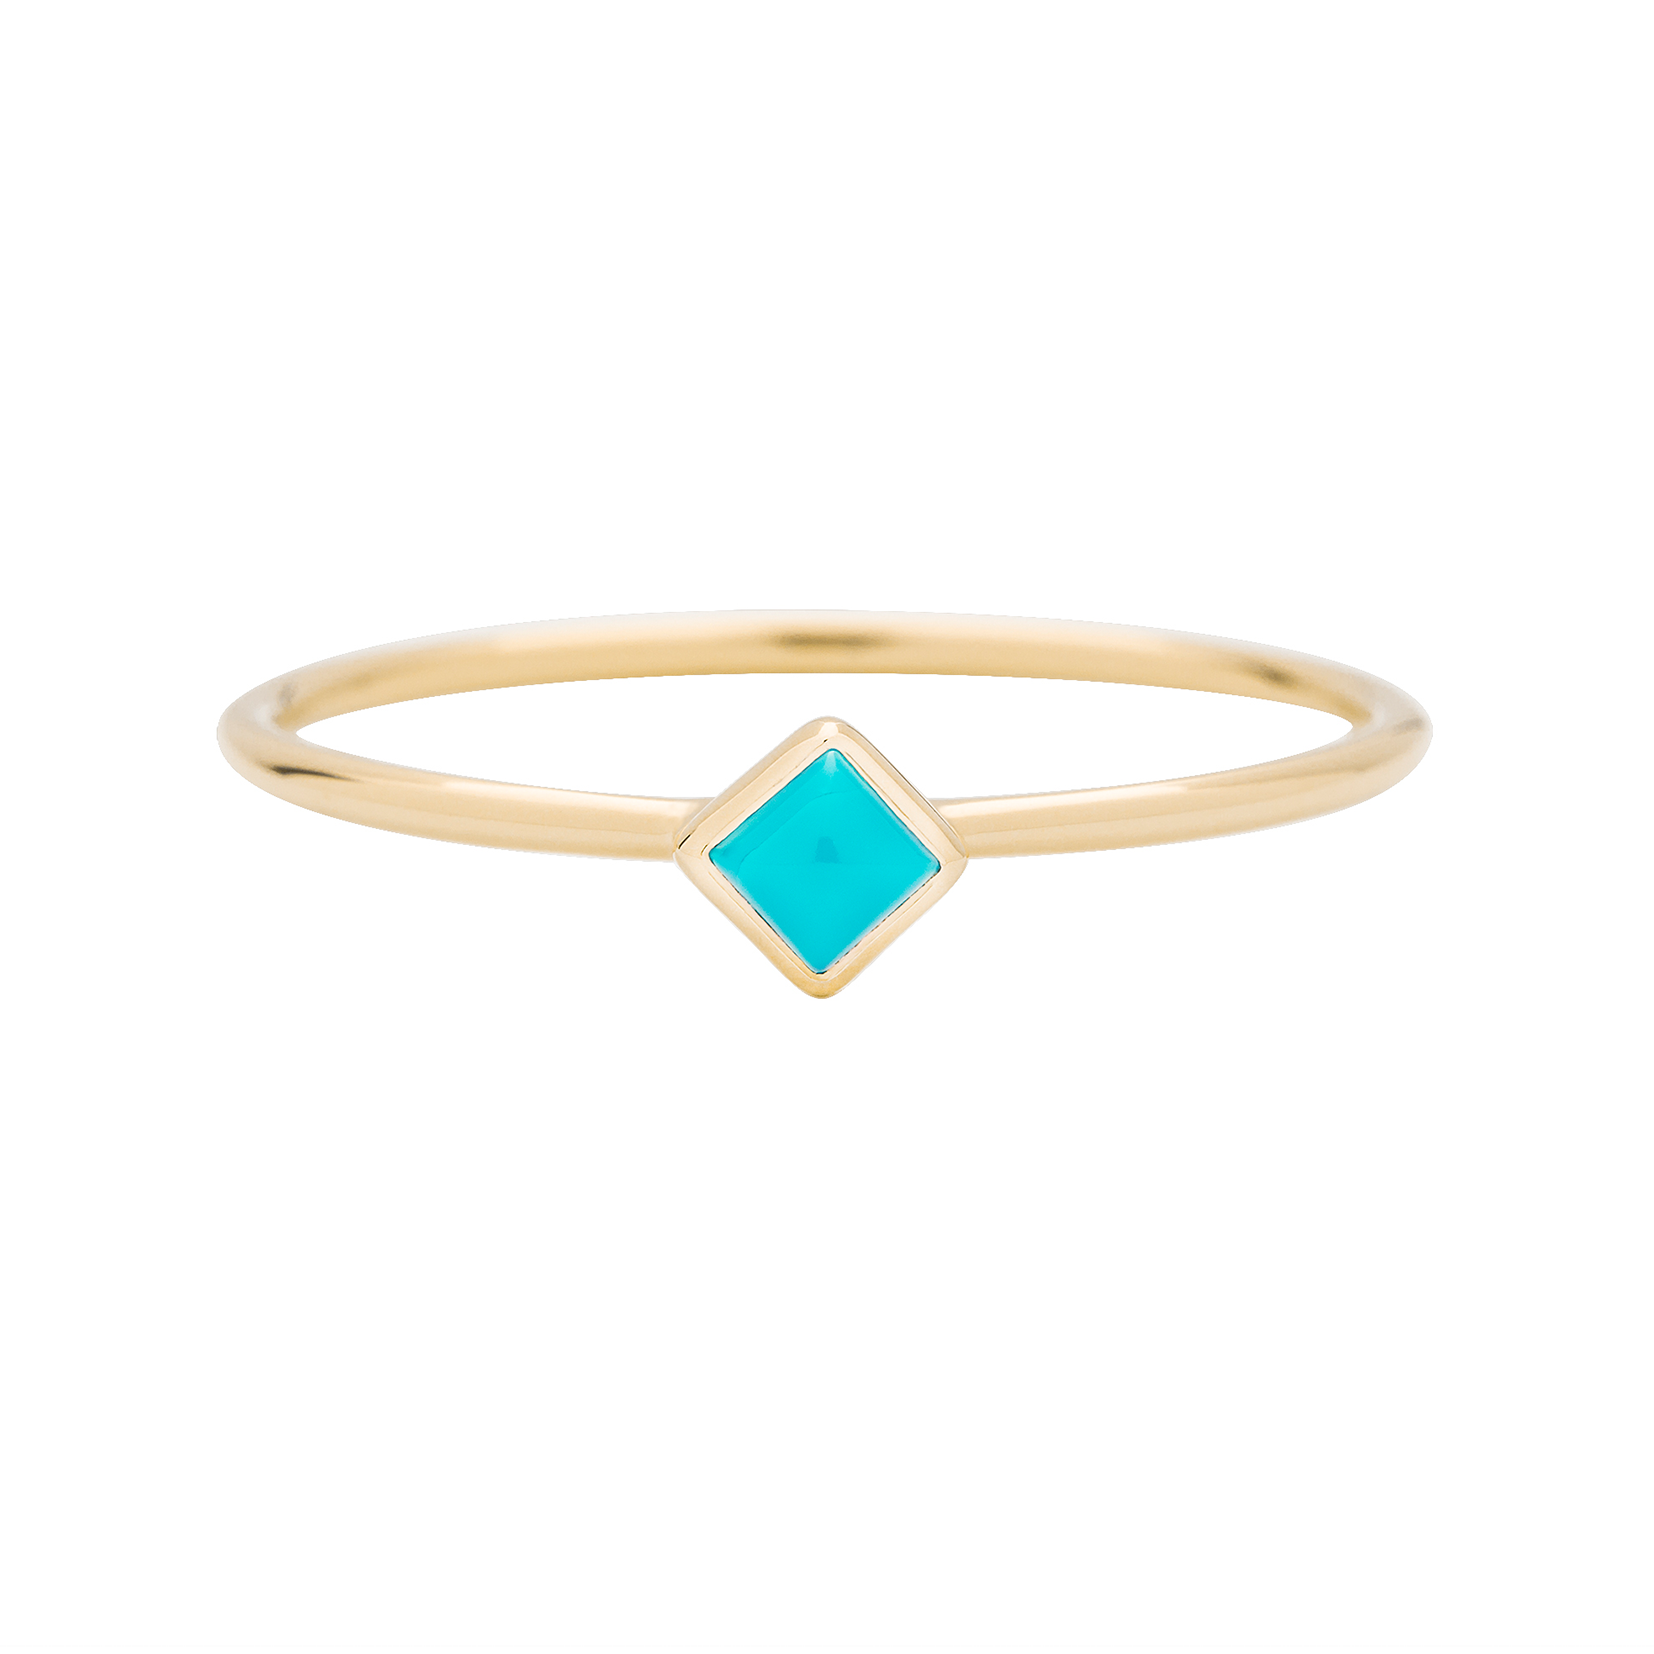 Metier by Tomfoolery: Turquoise Stacking Rings